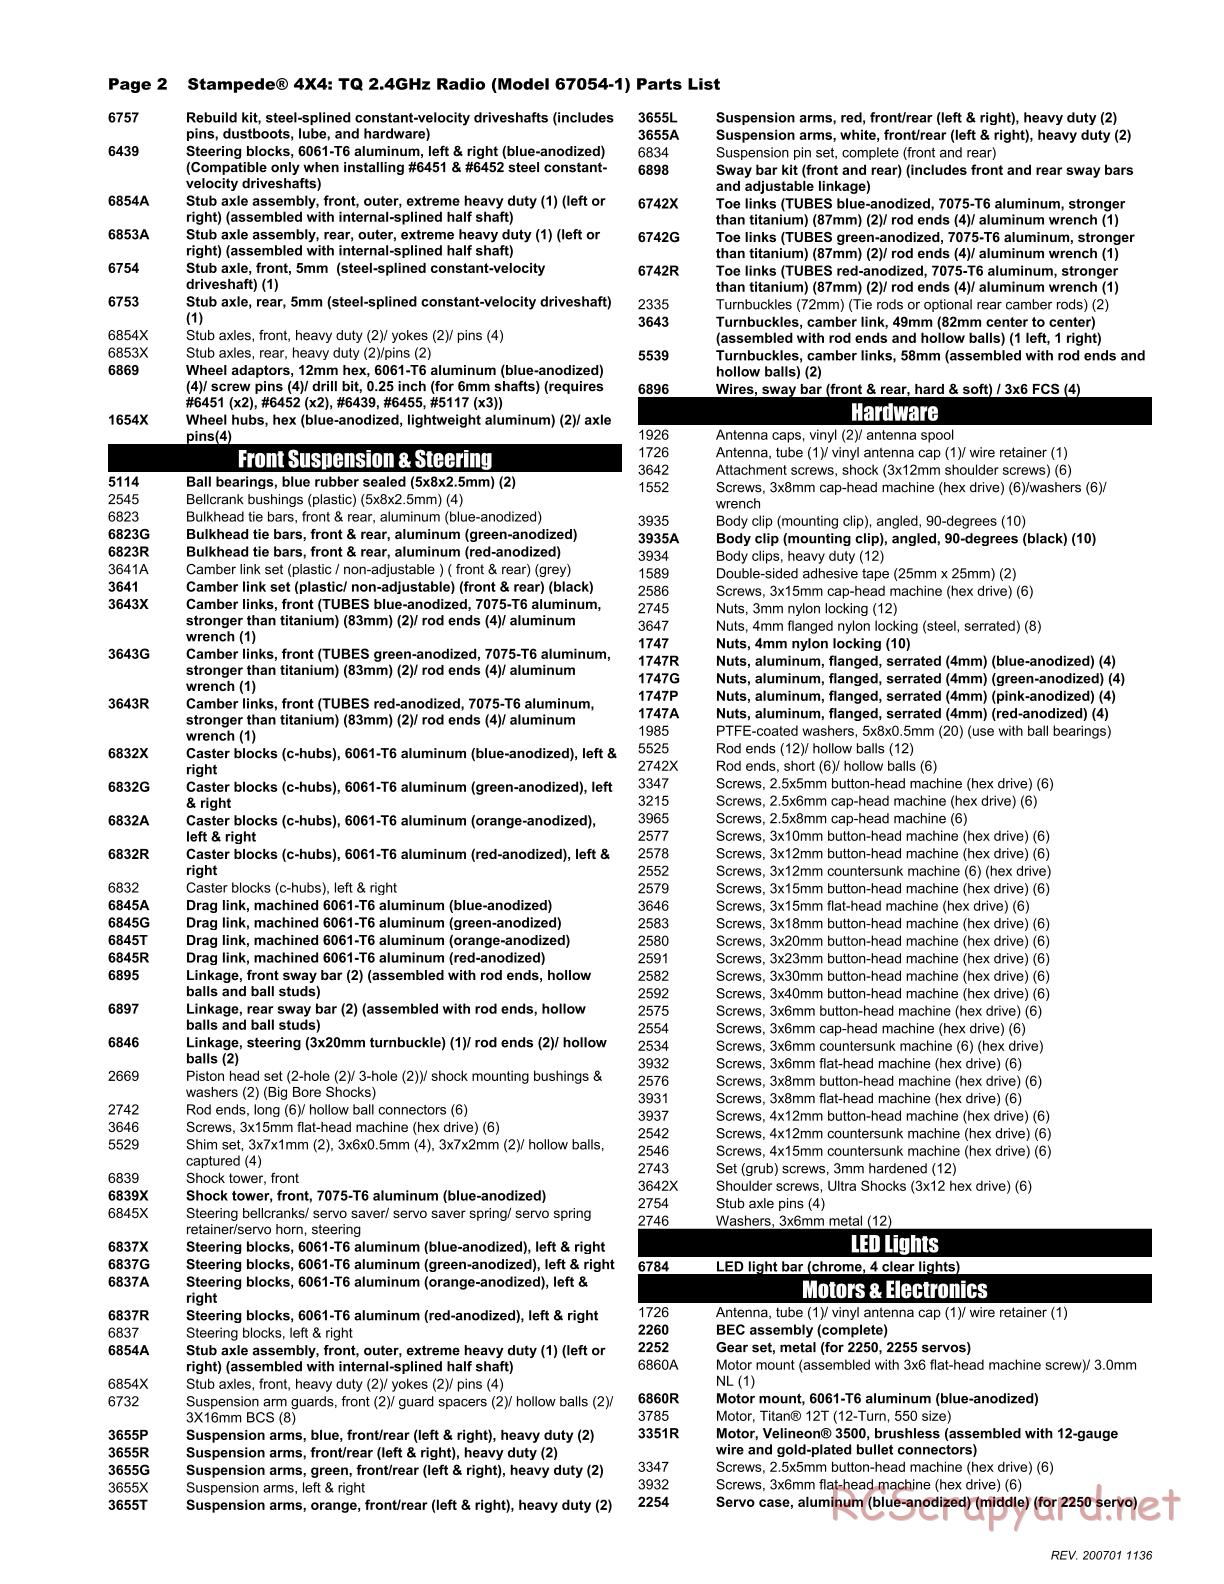 Traxxas - Stampede 4x4 - Parts List - Page 2